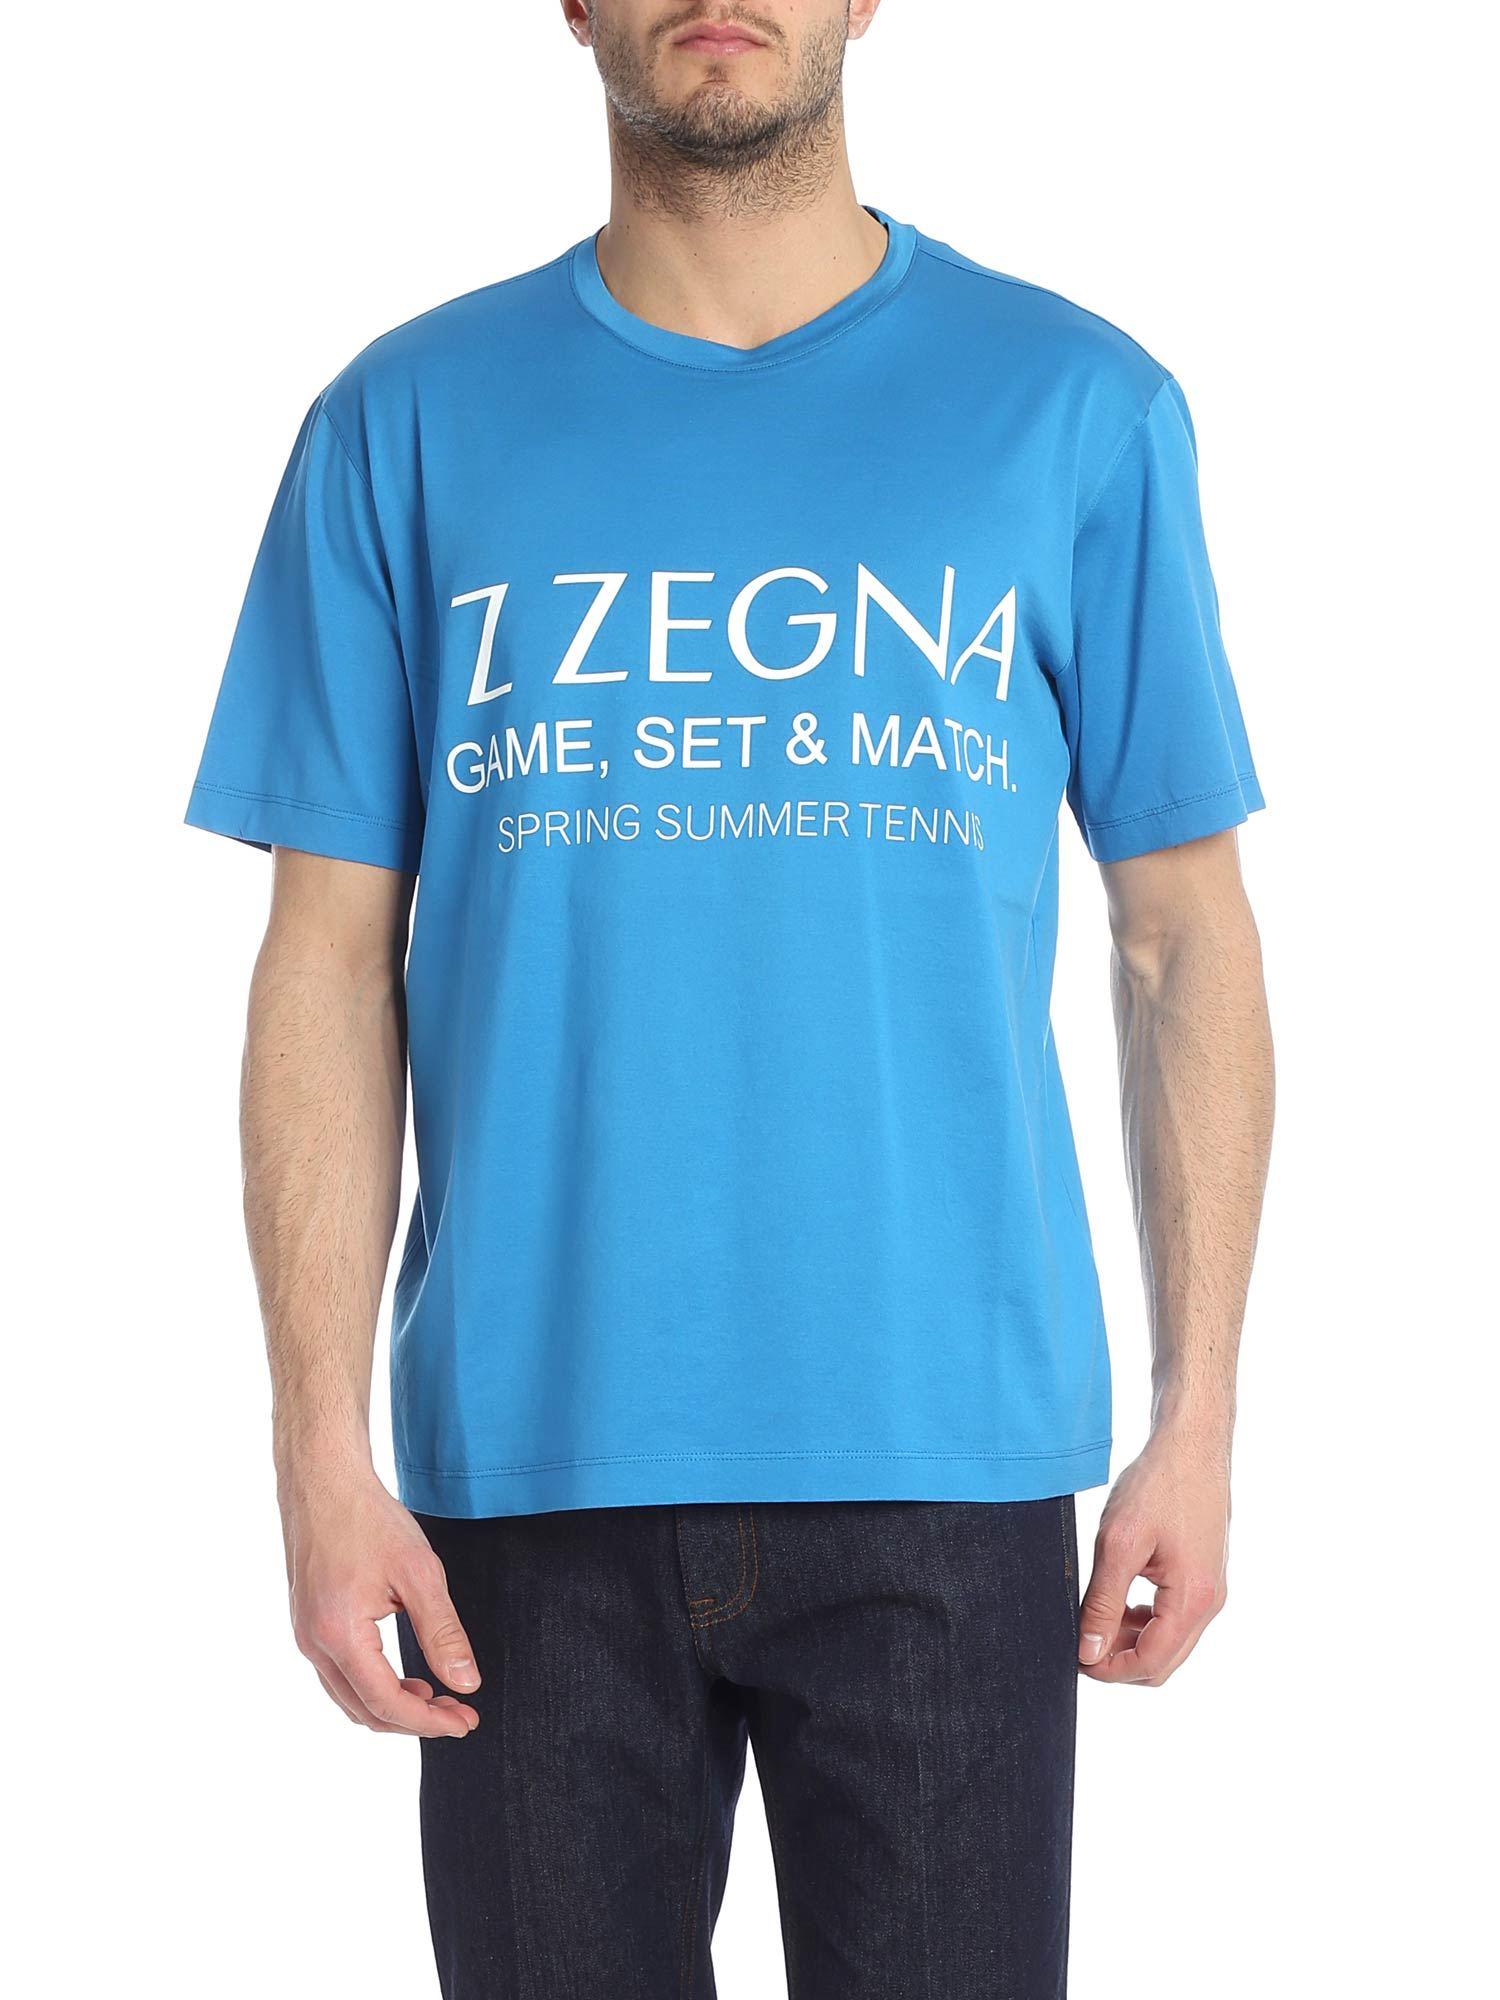 Z Zegna Cotton Logo Patch T-shirt in Turquoise (Blue) for Men - Save 47 ...